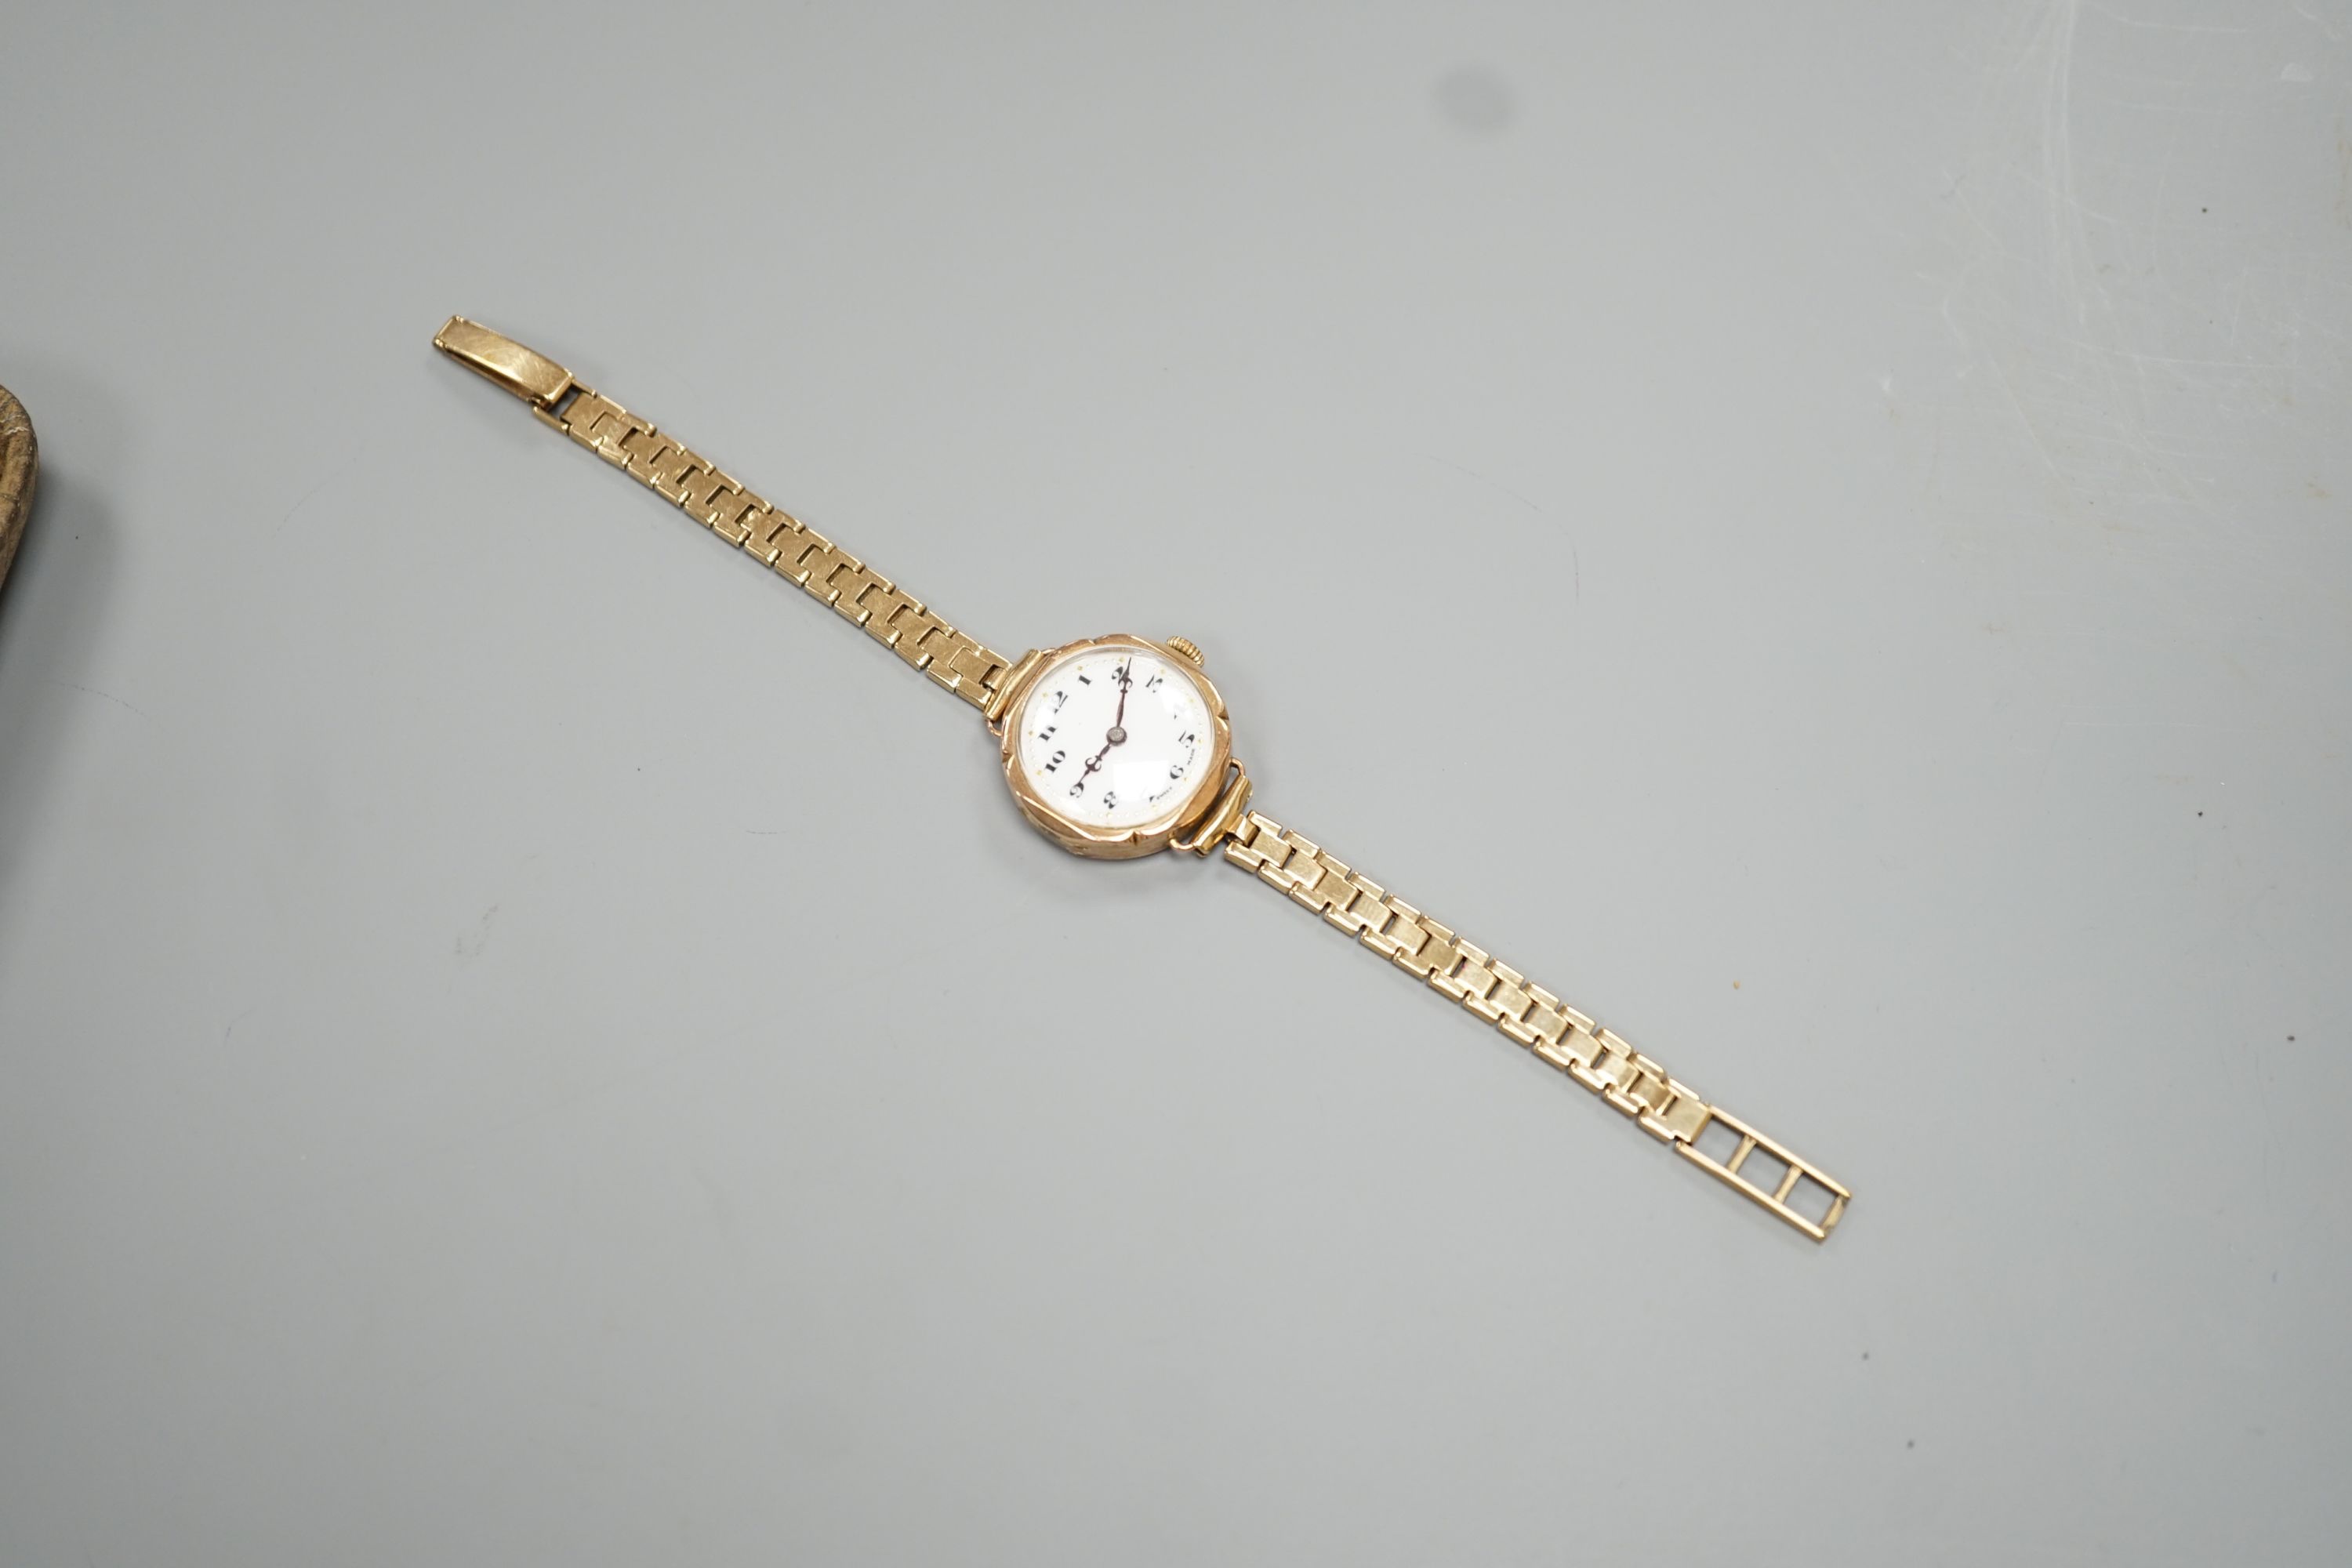 A lady's early 20th century 9ct gold Rolex manual wind wrist watch, on an associated 9ct gold bracelet